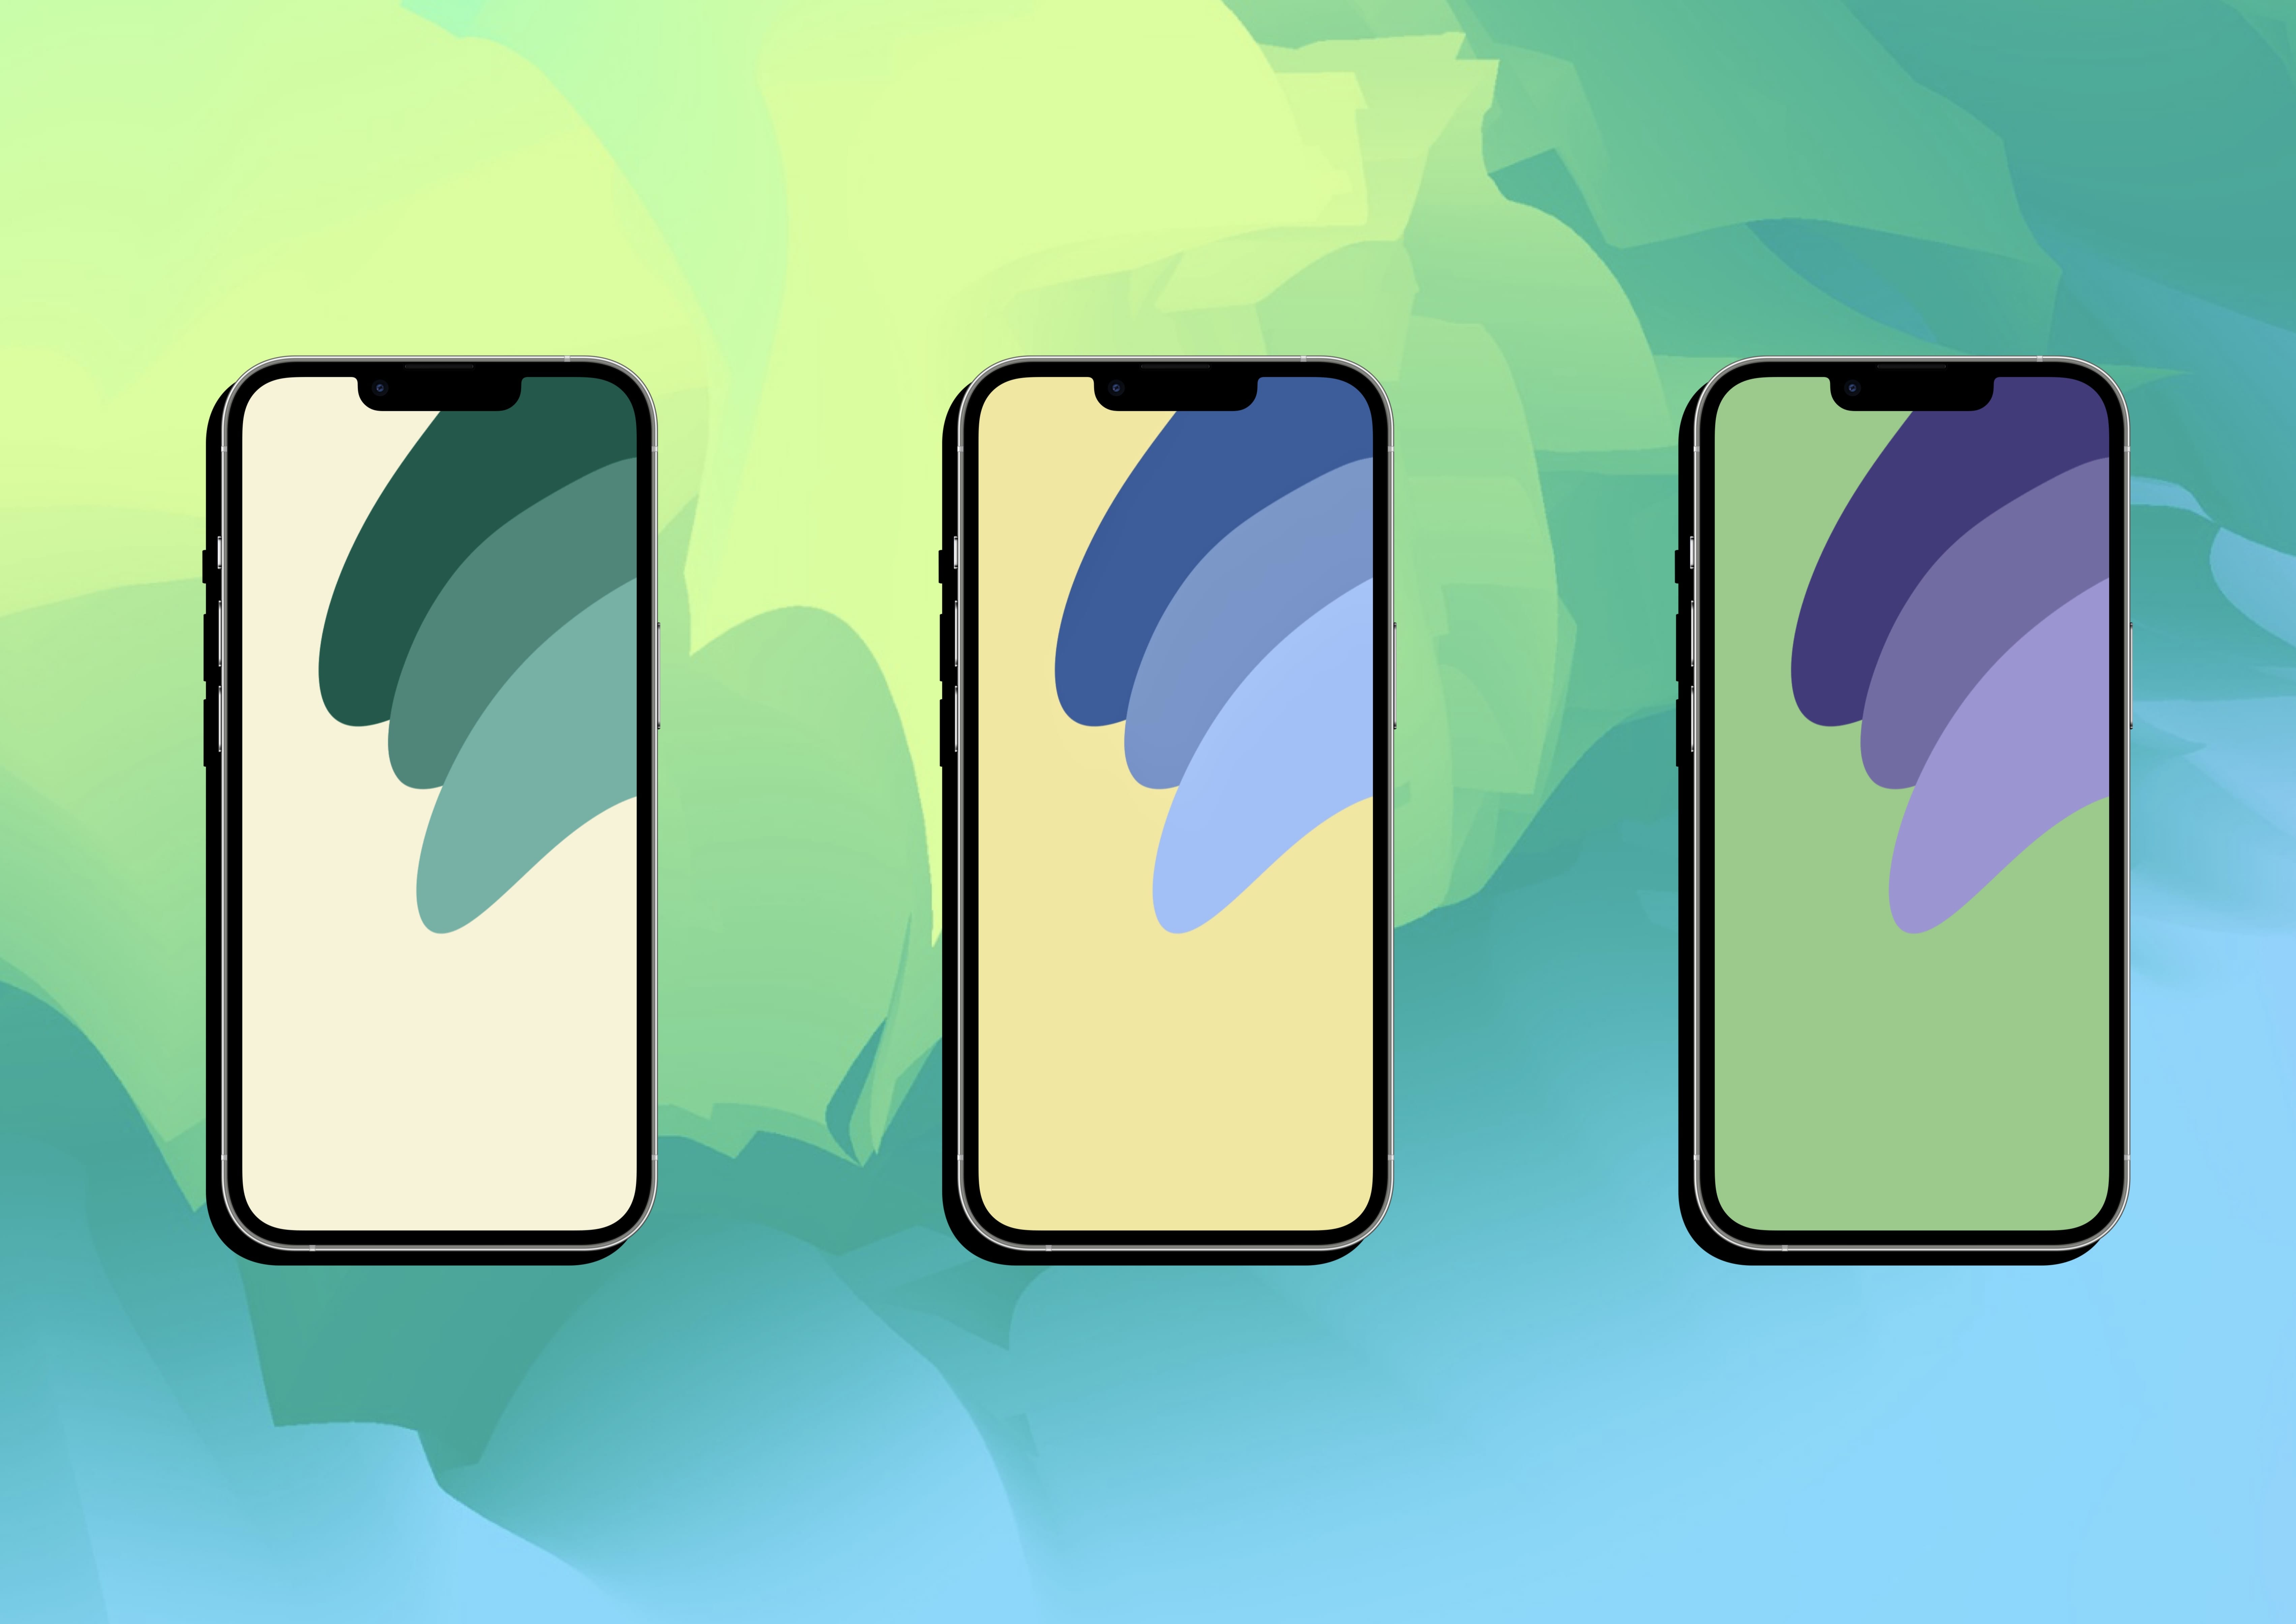 Abstract curves wallpaper pack for iPhone